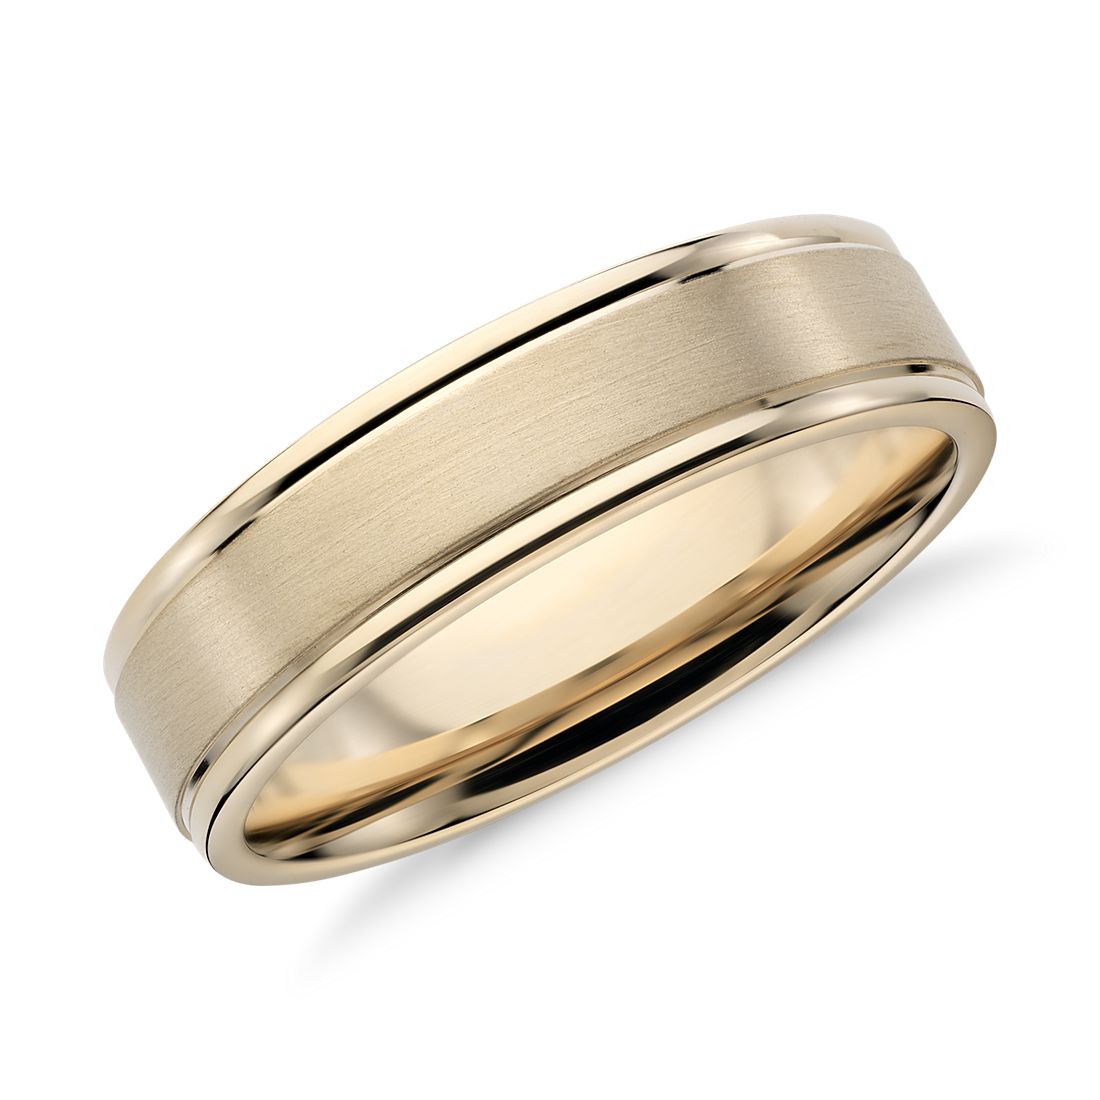 Brushed Inlay Wedding Ring in 18k Yellow Gold (6 mm)